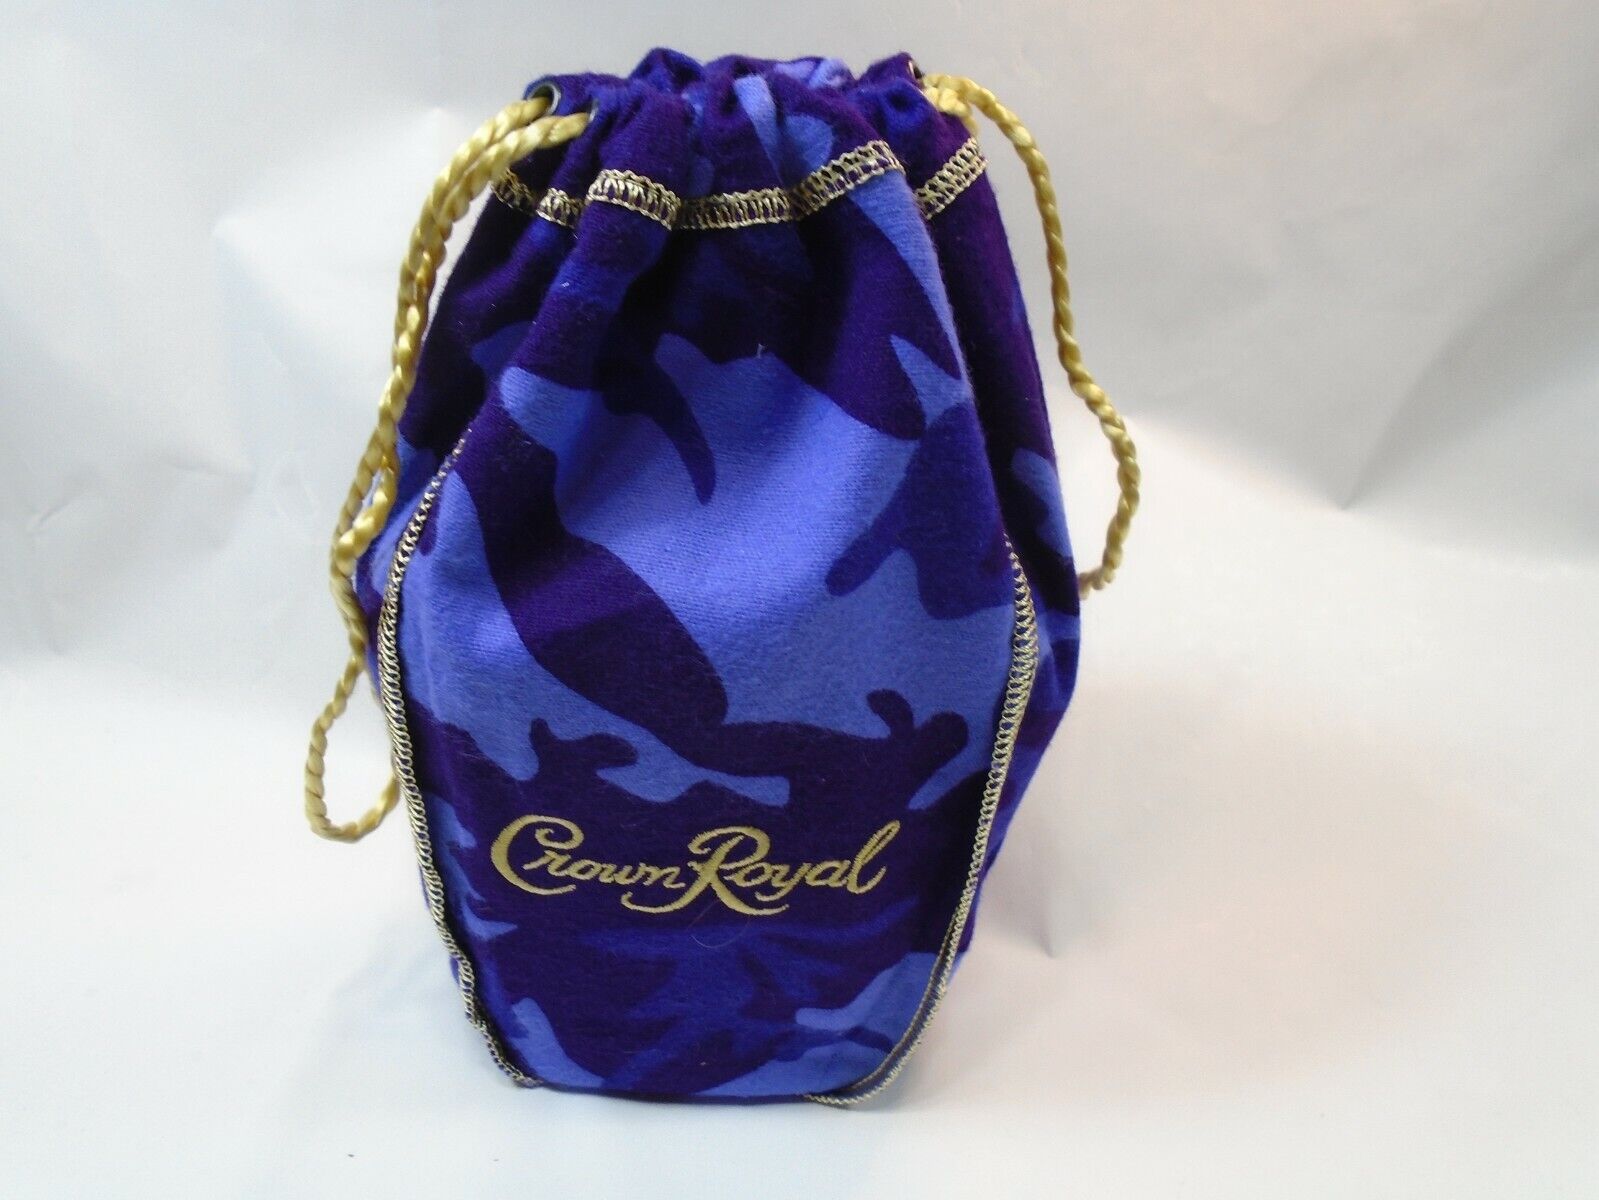 Crown Royal Bags Your Choice of Many Colors / Styles Variety Build a Collection